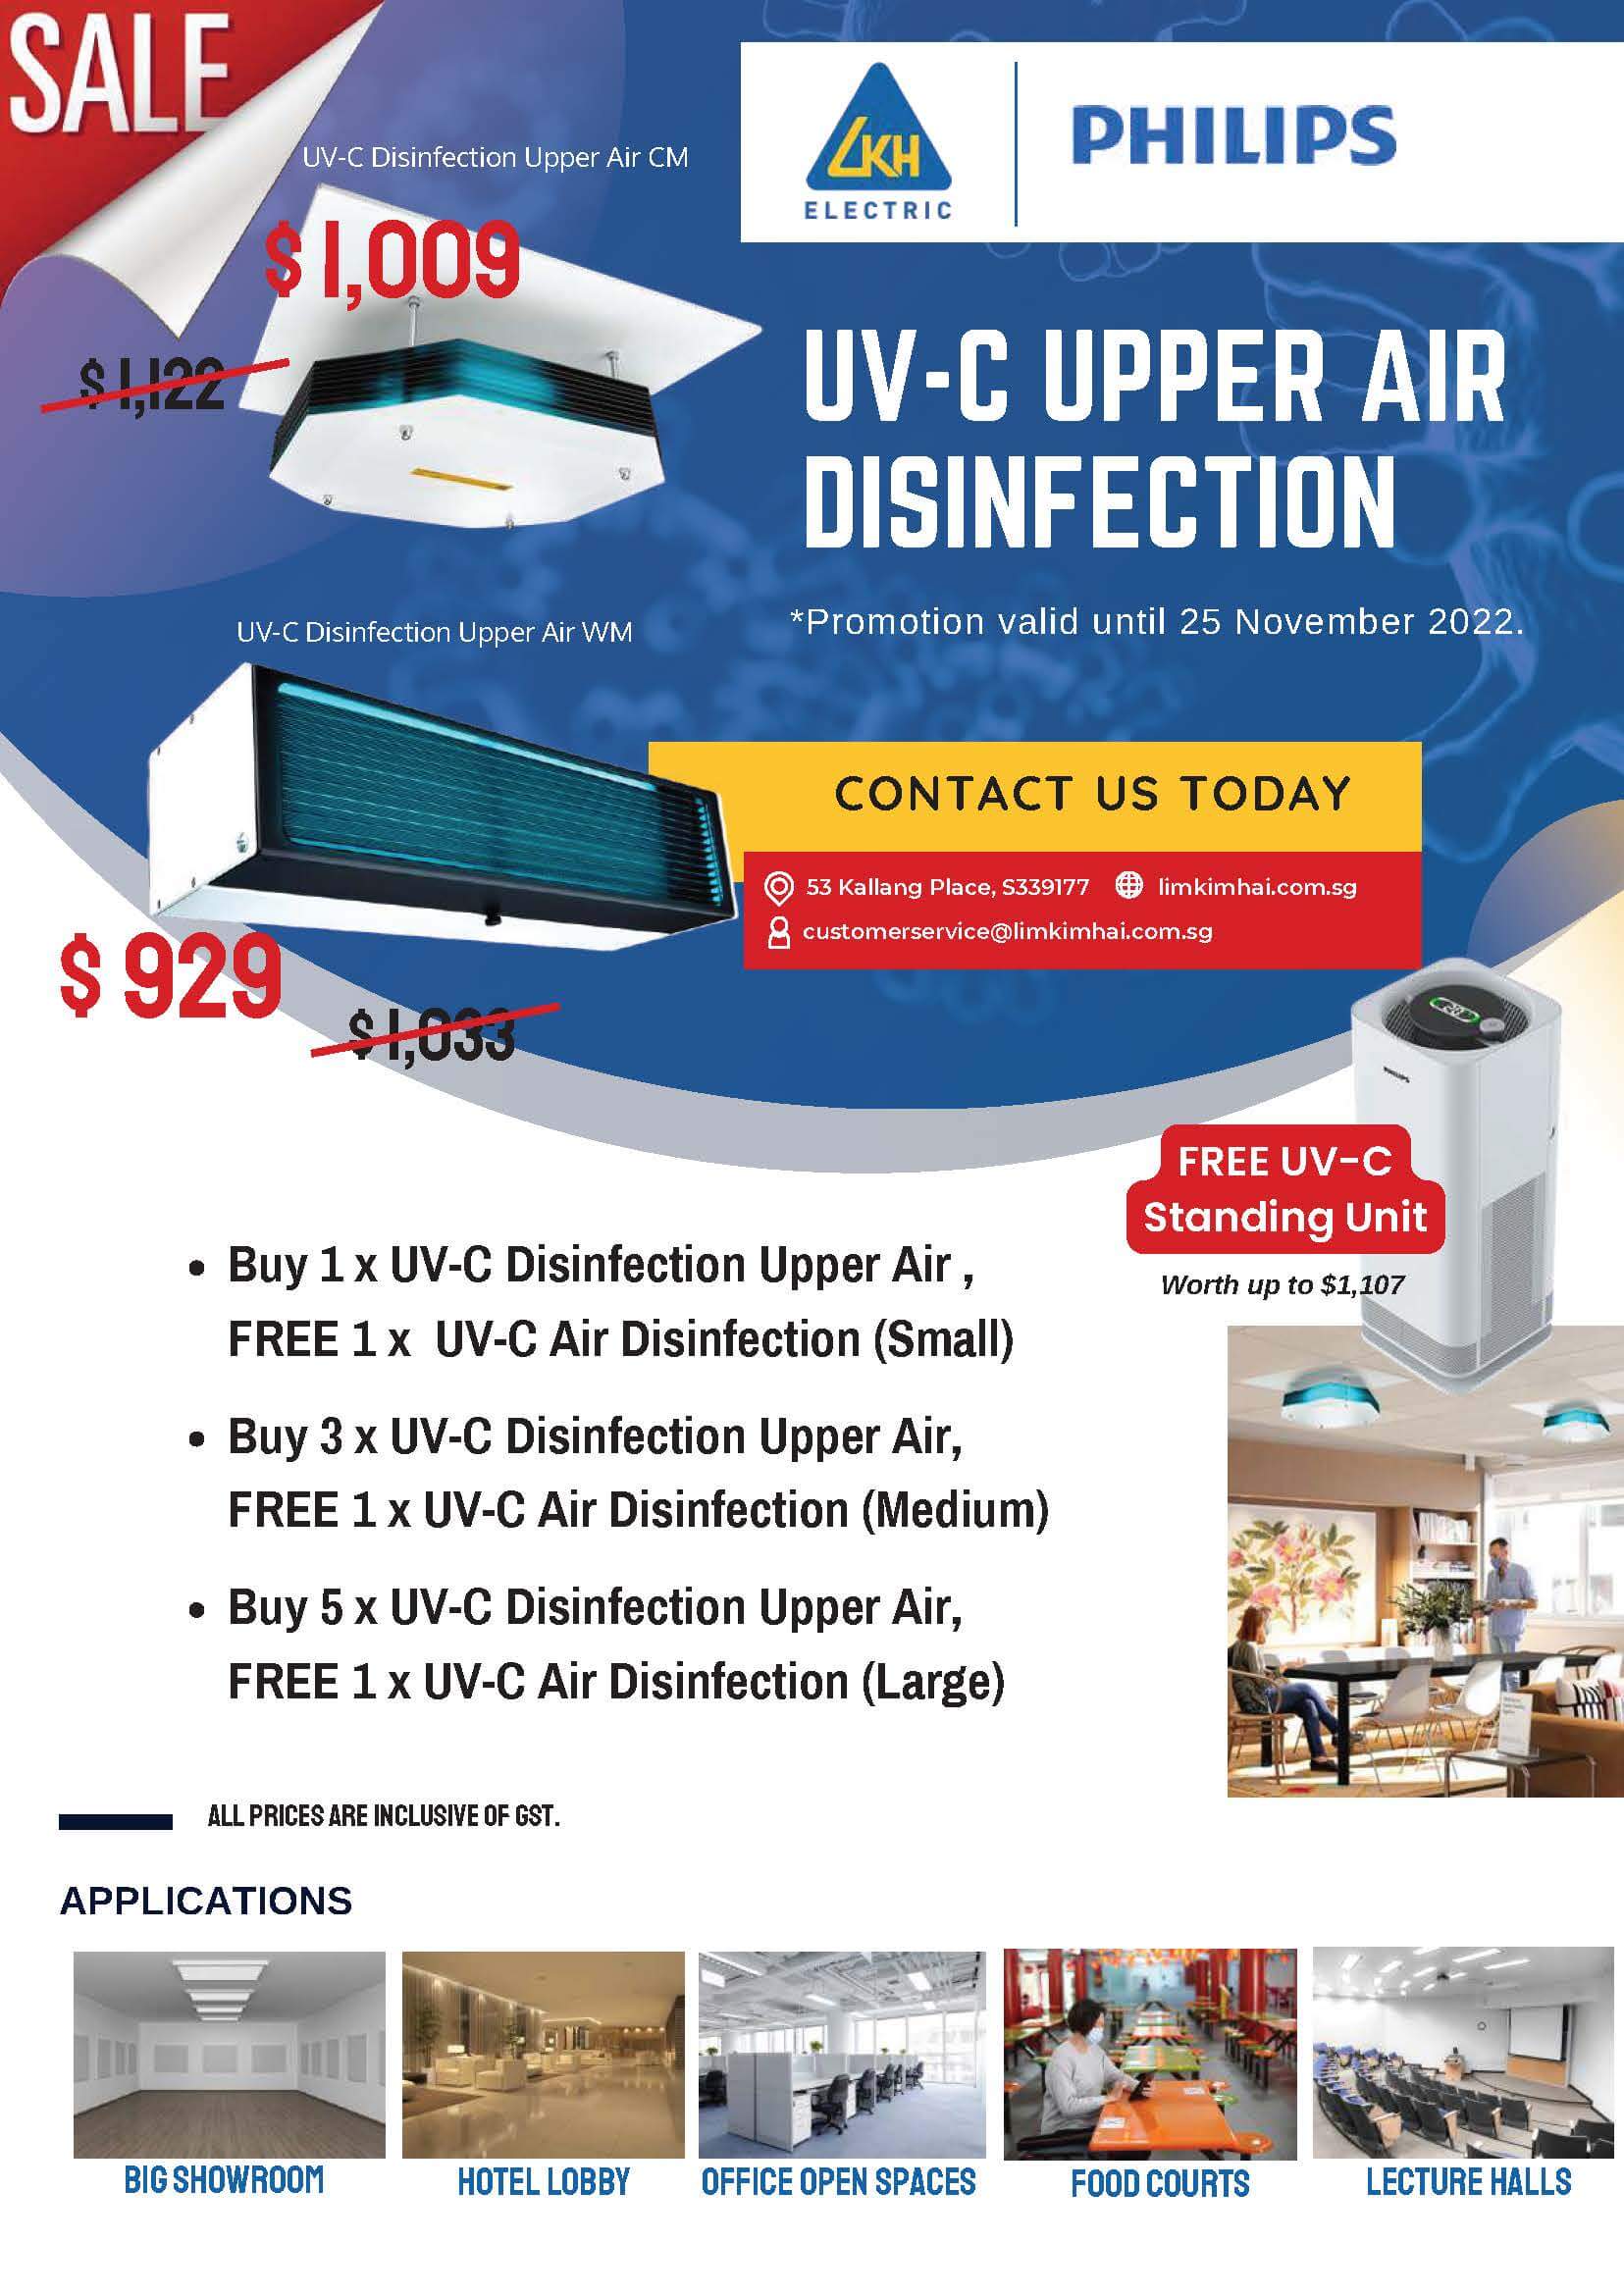 Philips UVC Upper Air Disinfection Promotion